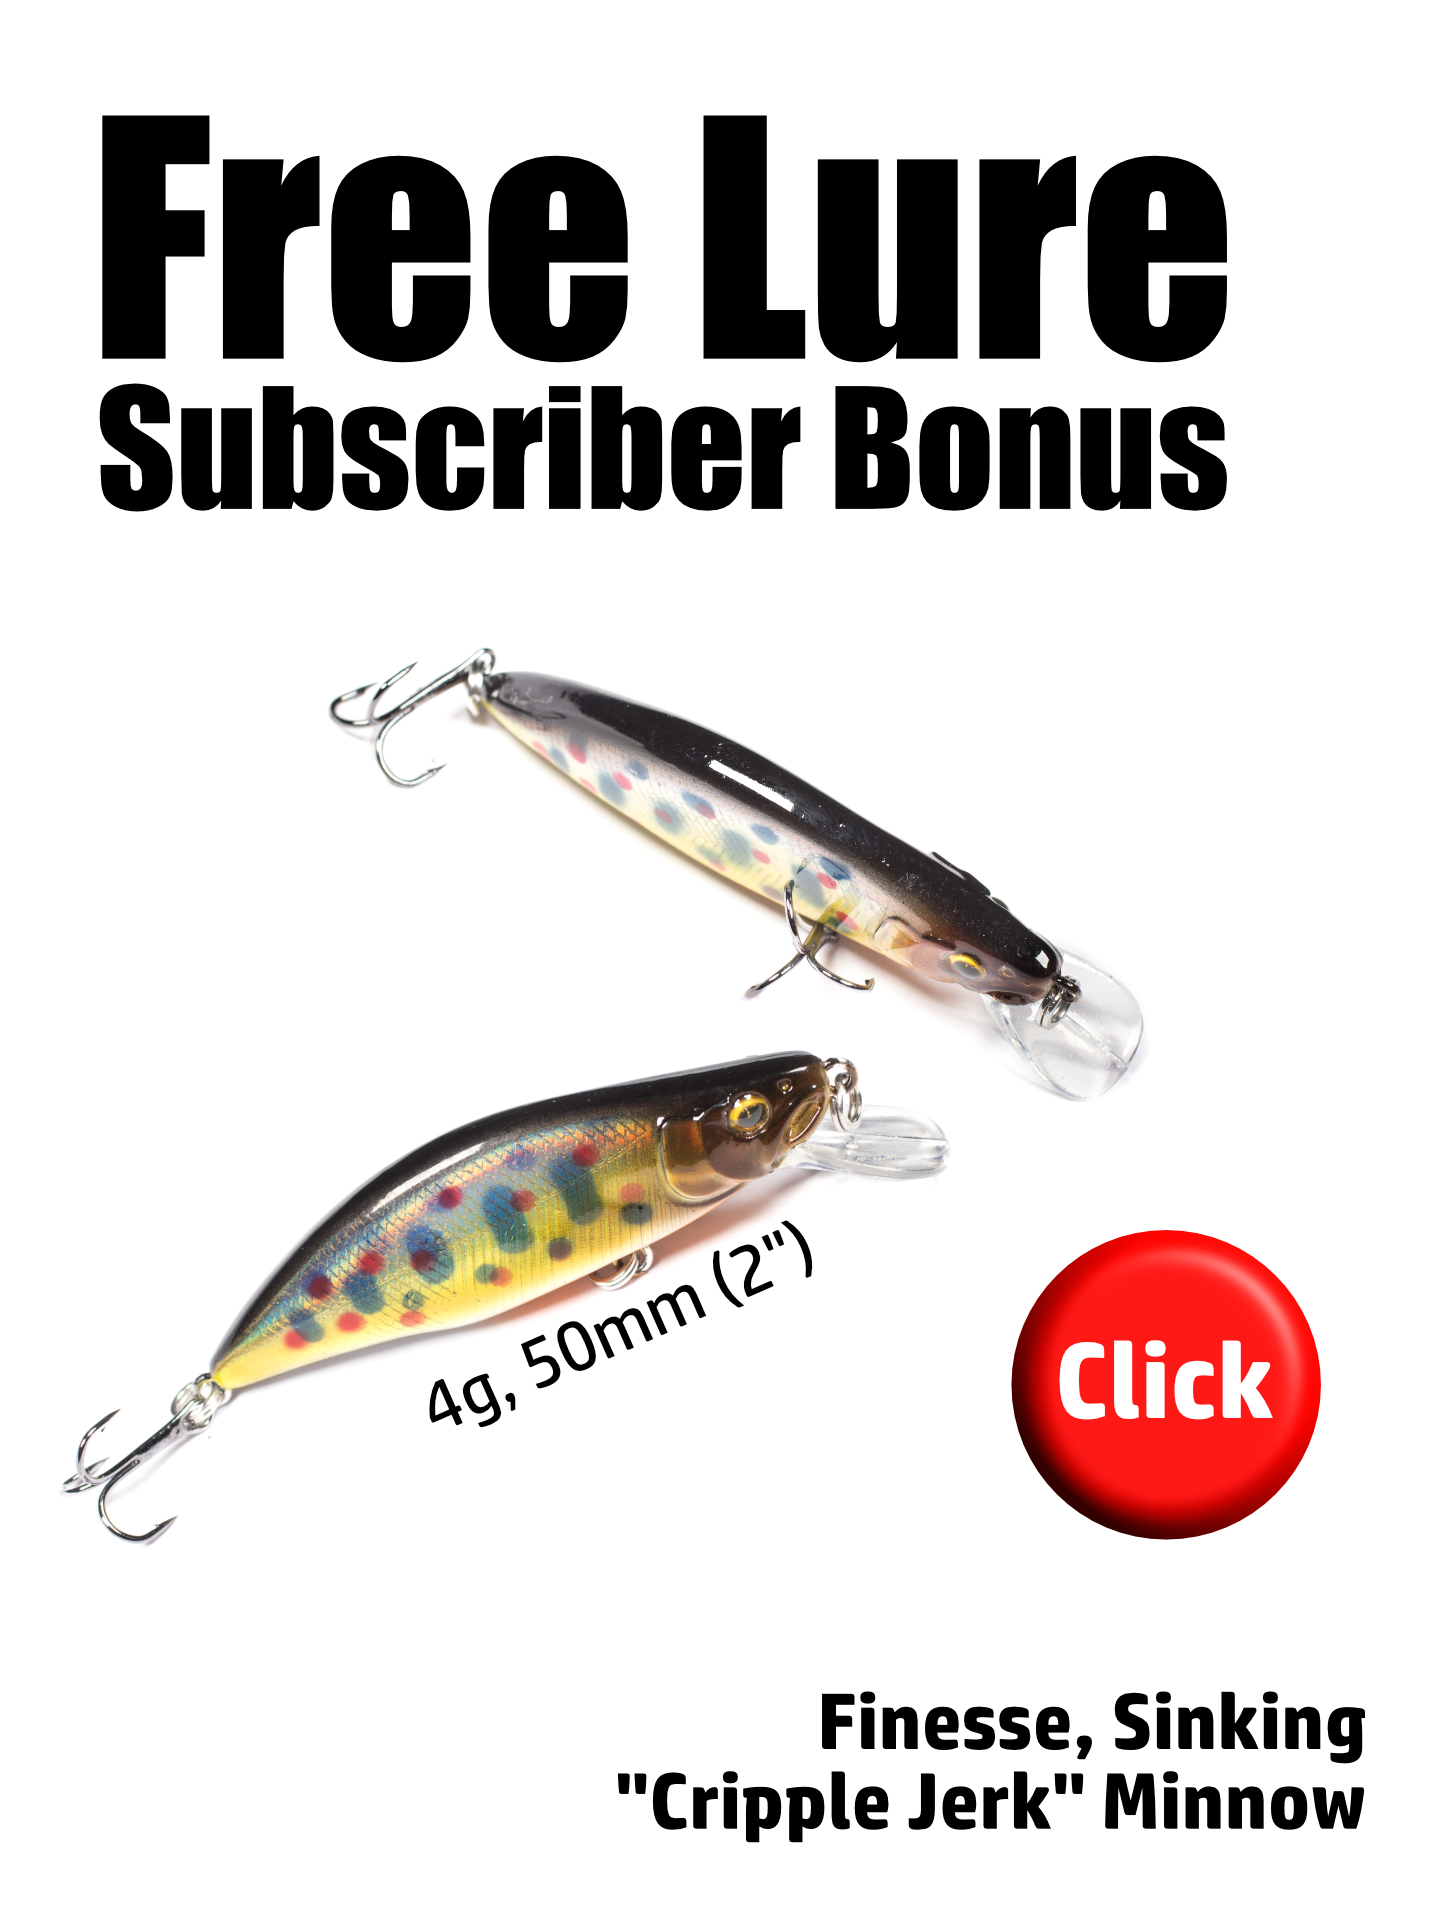 Bait Finesse System Fishing: The Best Guide on the Web